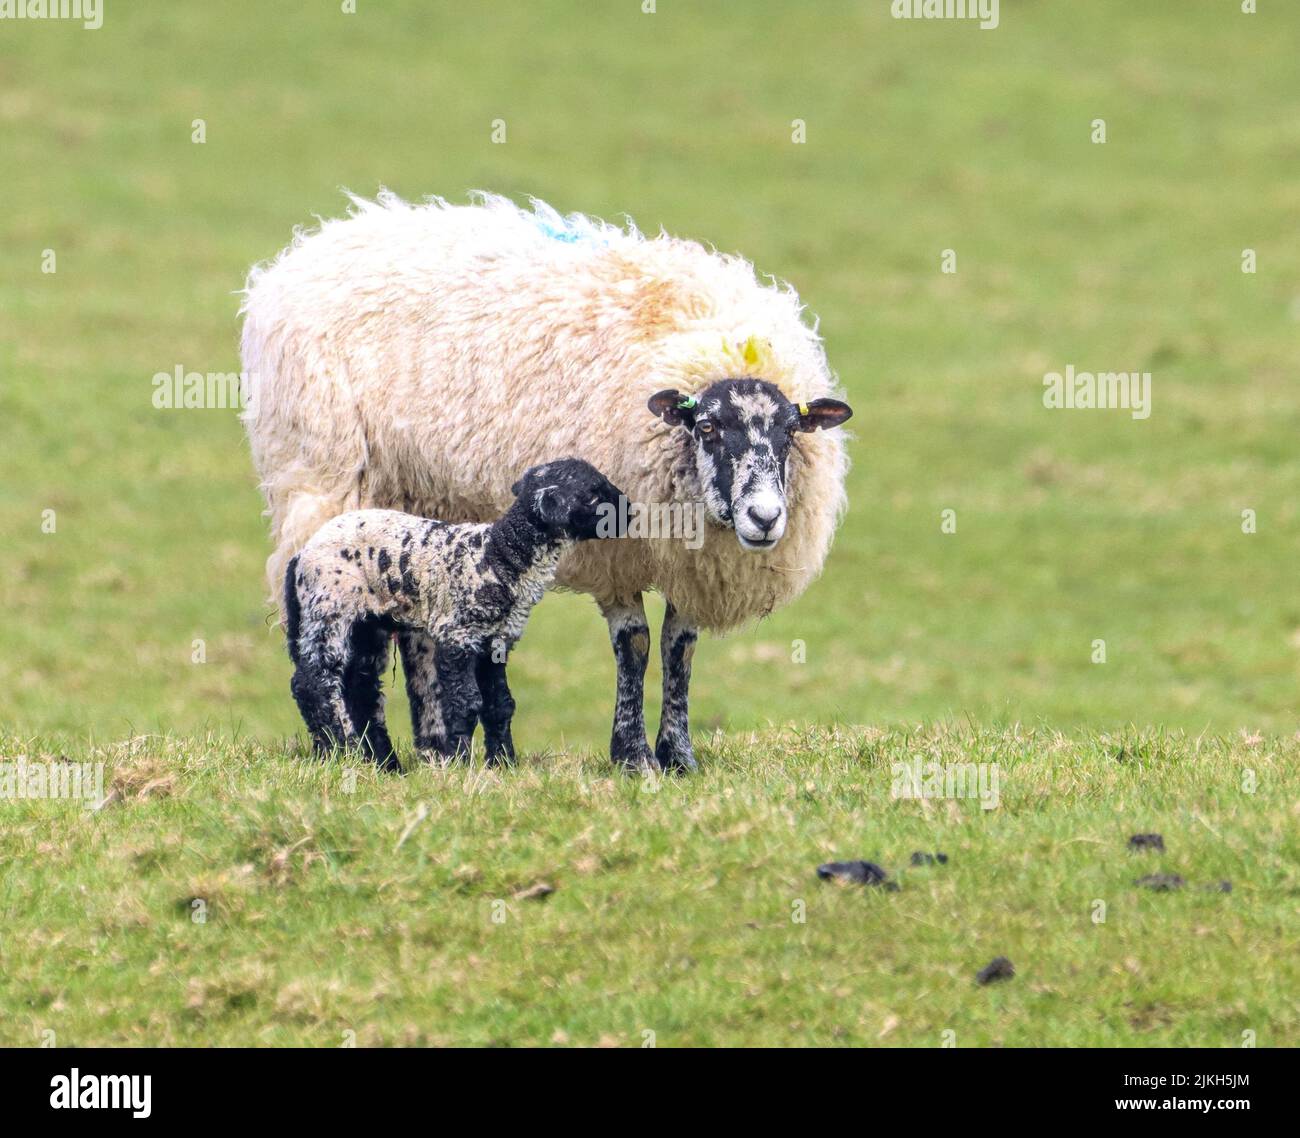 A Lonk sheep with a new born cute lamb on a green grass Stock Photo